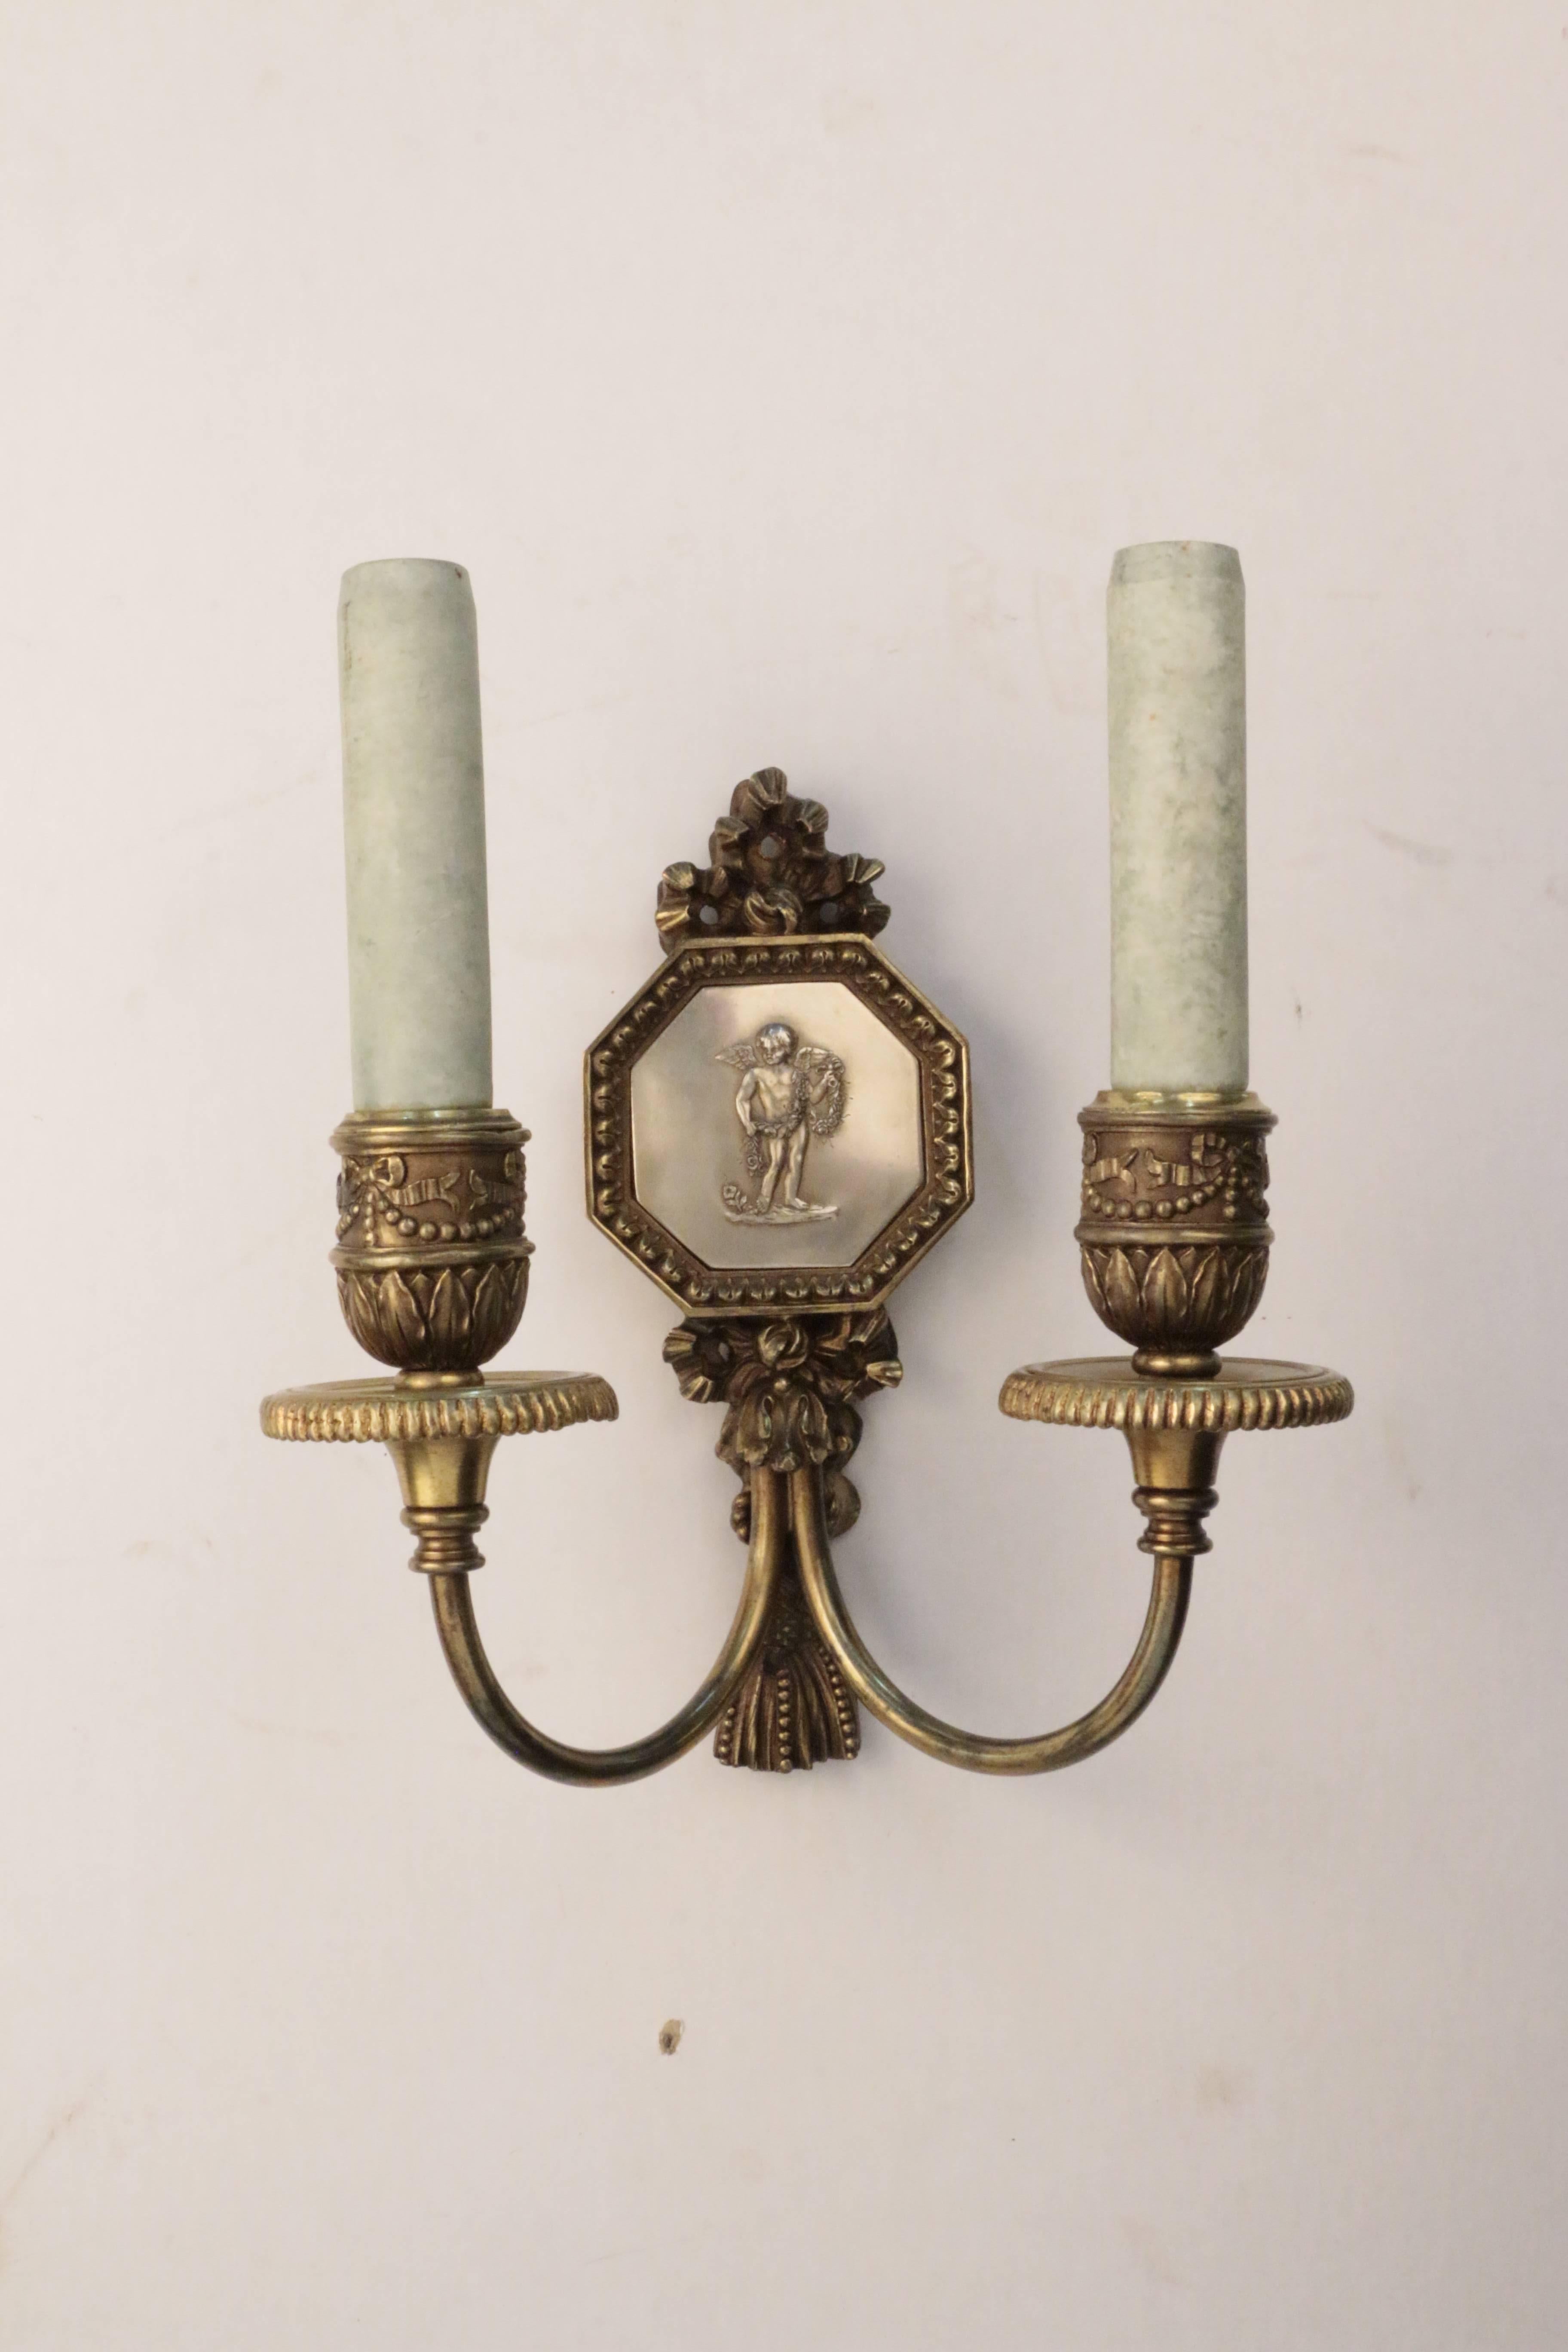 Pair of E F Caldwell bronze two-light wall sconces, each crisply modeled in Louis XV1 style with acanthus, beaded and ribbon motif and set with an hexagonal silvered panel depicting a cherub with floral garland. The bisque candle sleeves are